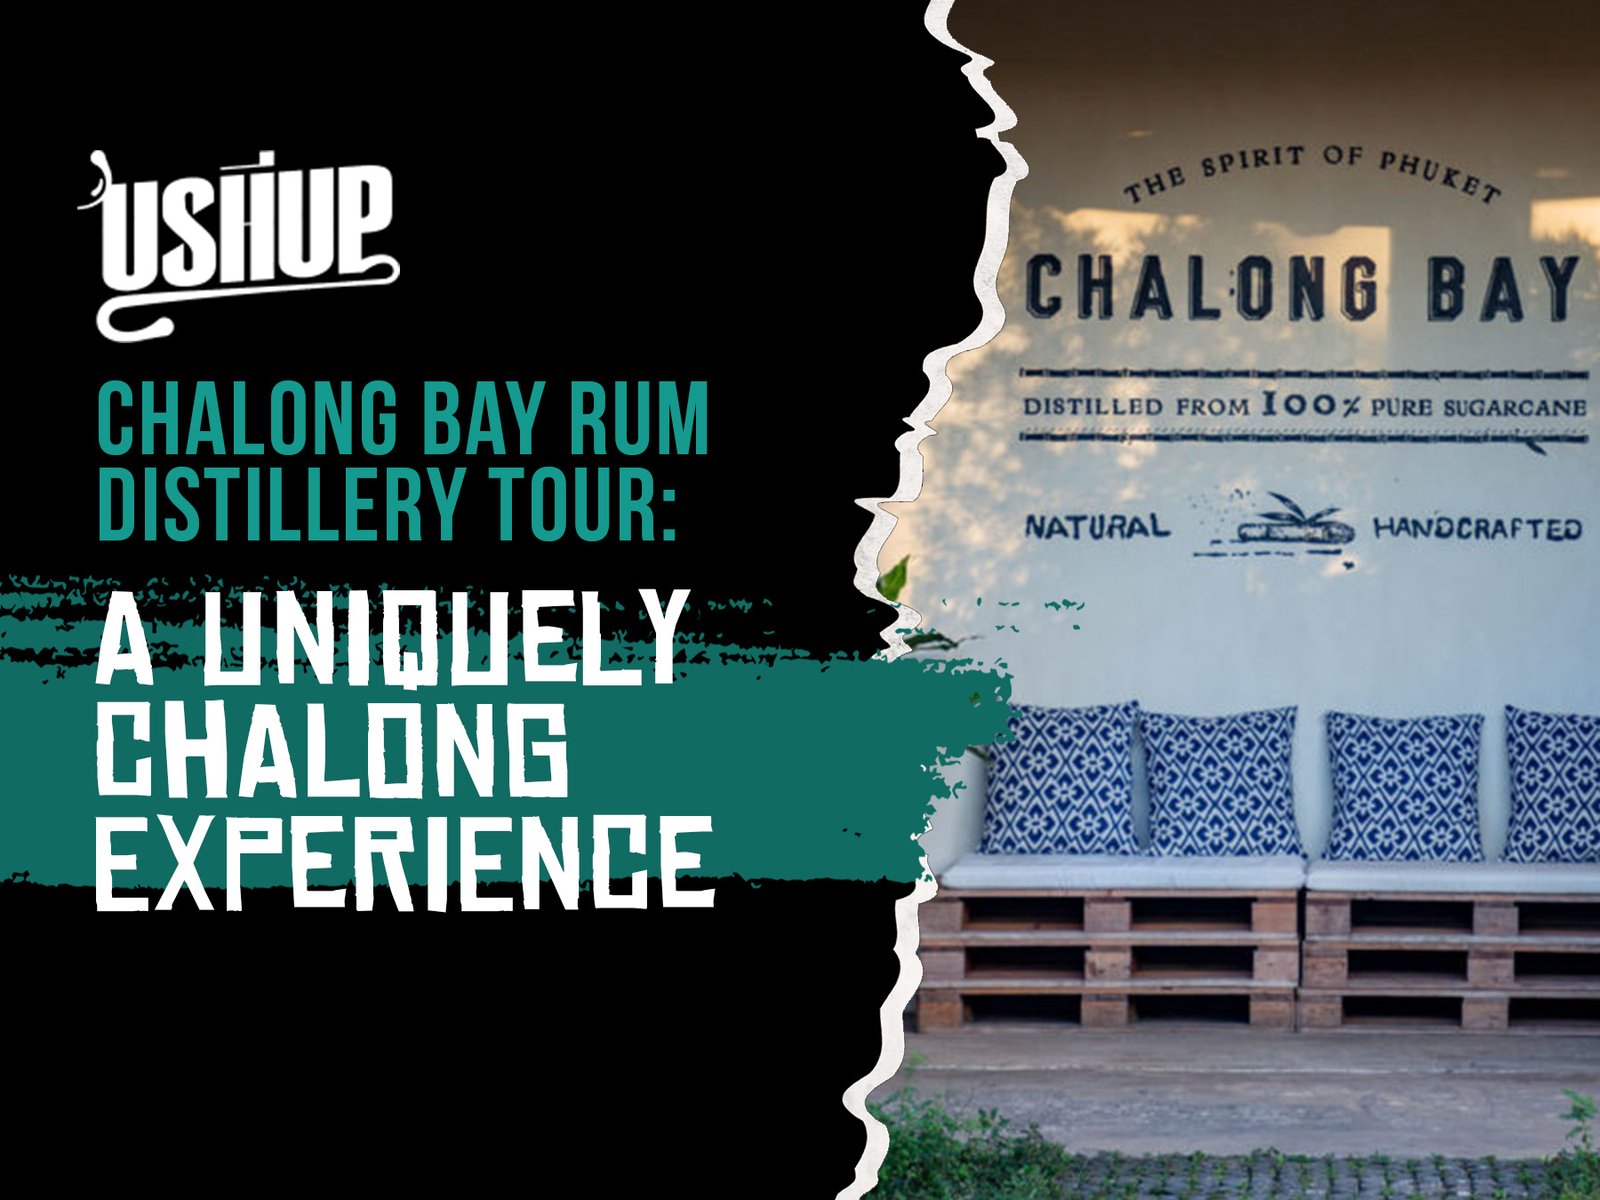 Chalong Bay Rum Distillery Tour A Uniquely Chalong Experience